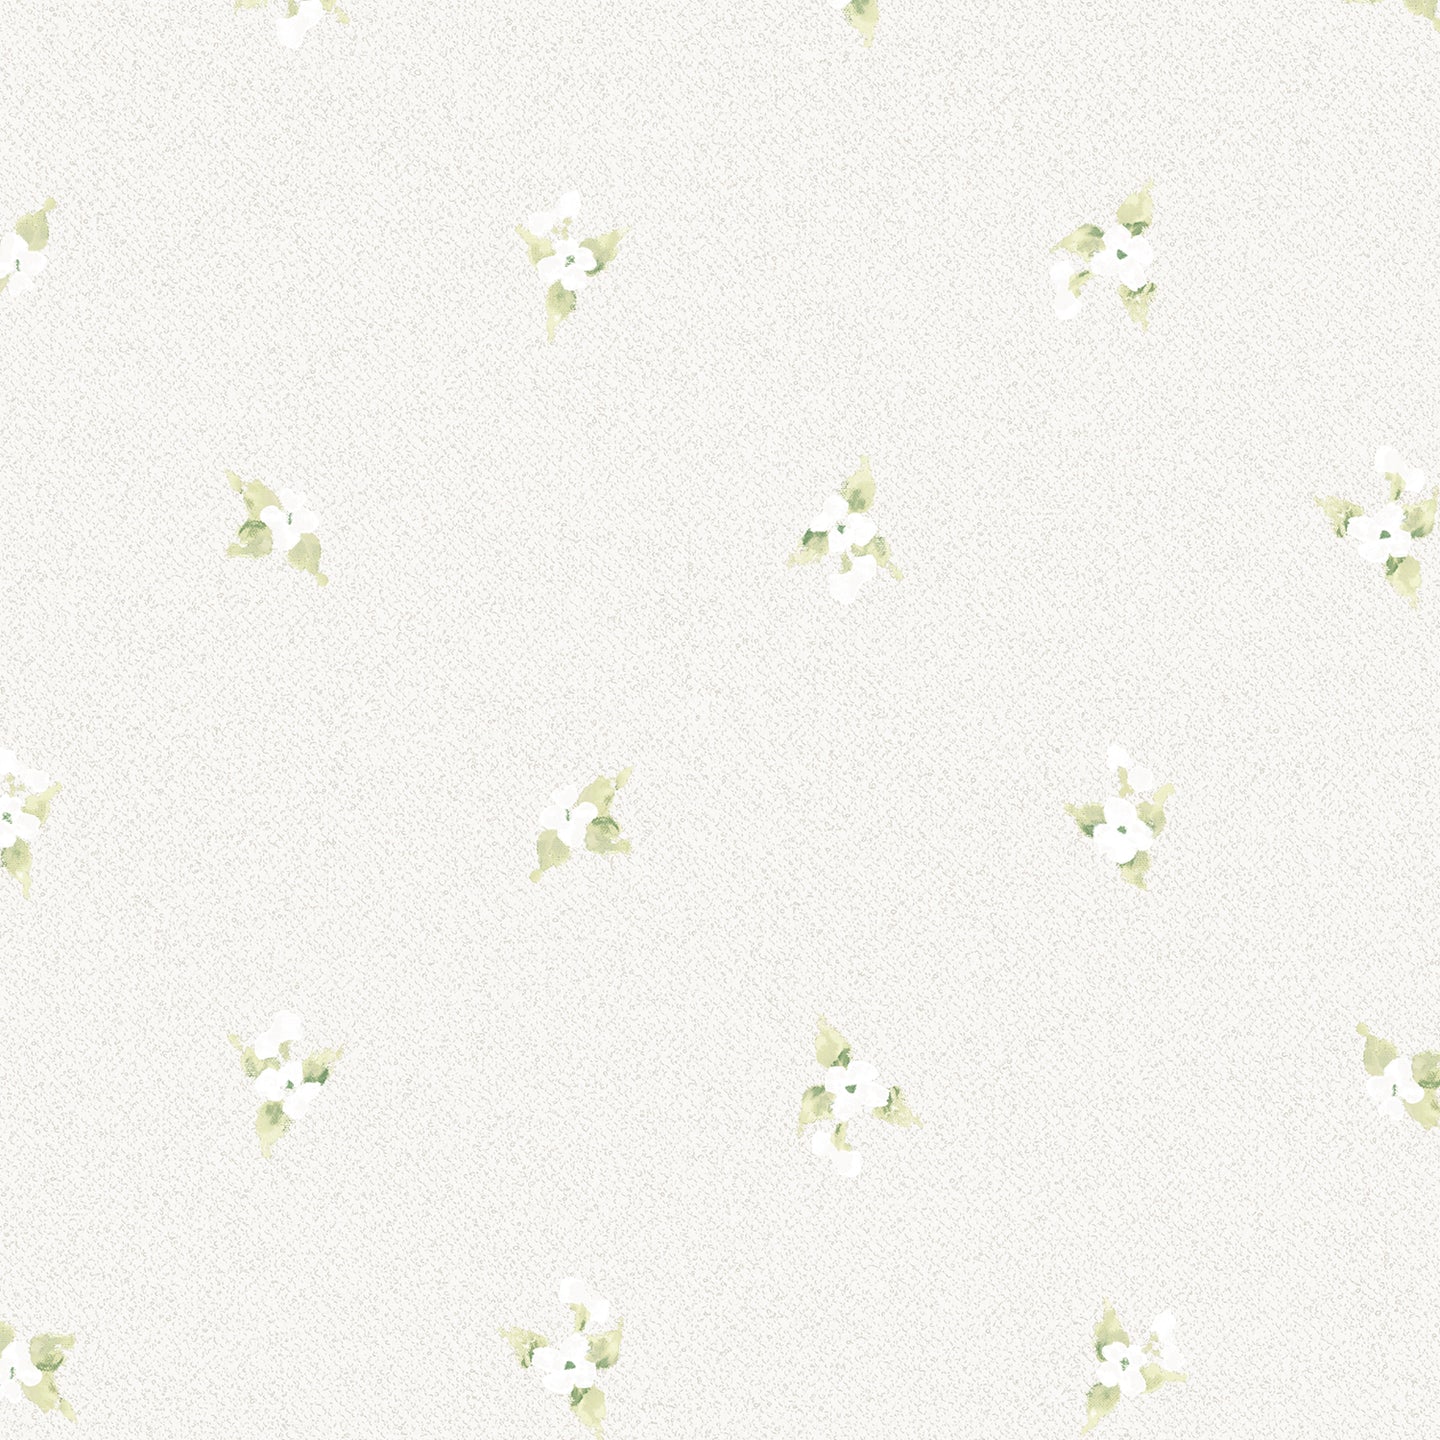 wallpaper, wallpapers, leaves, floral, flowers, spot